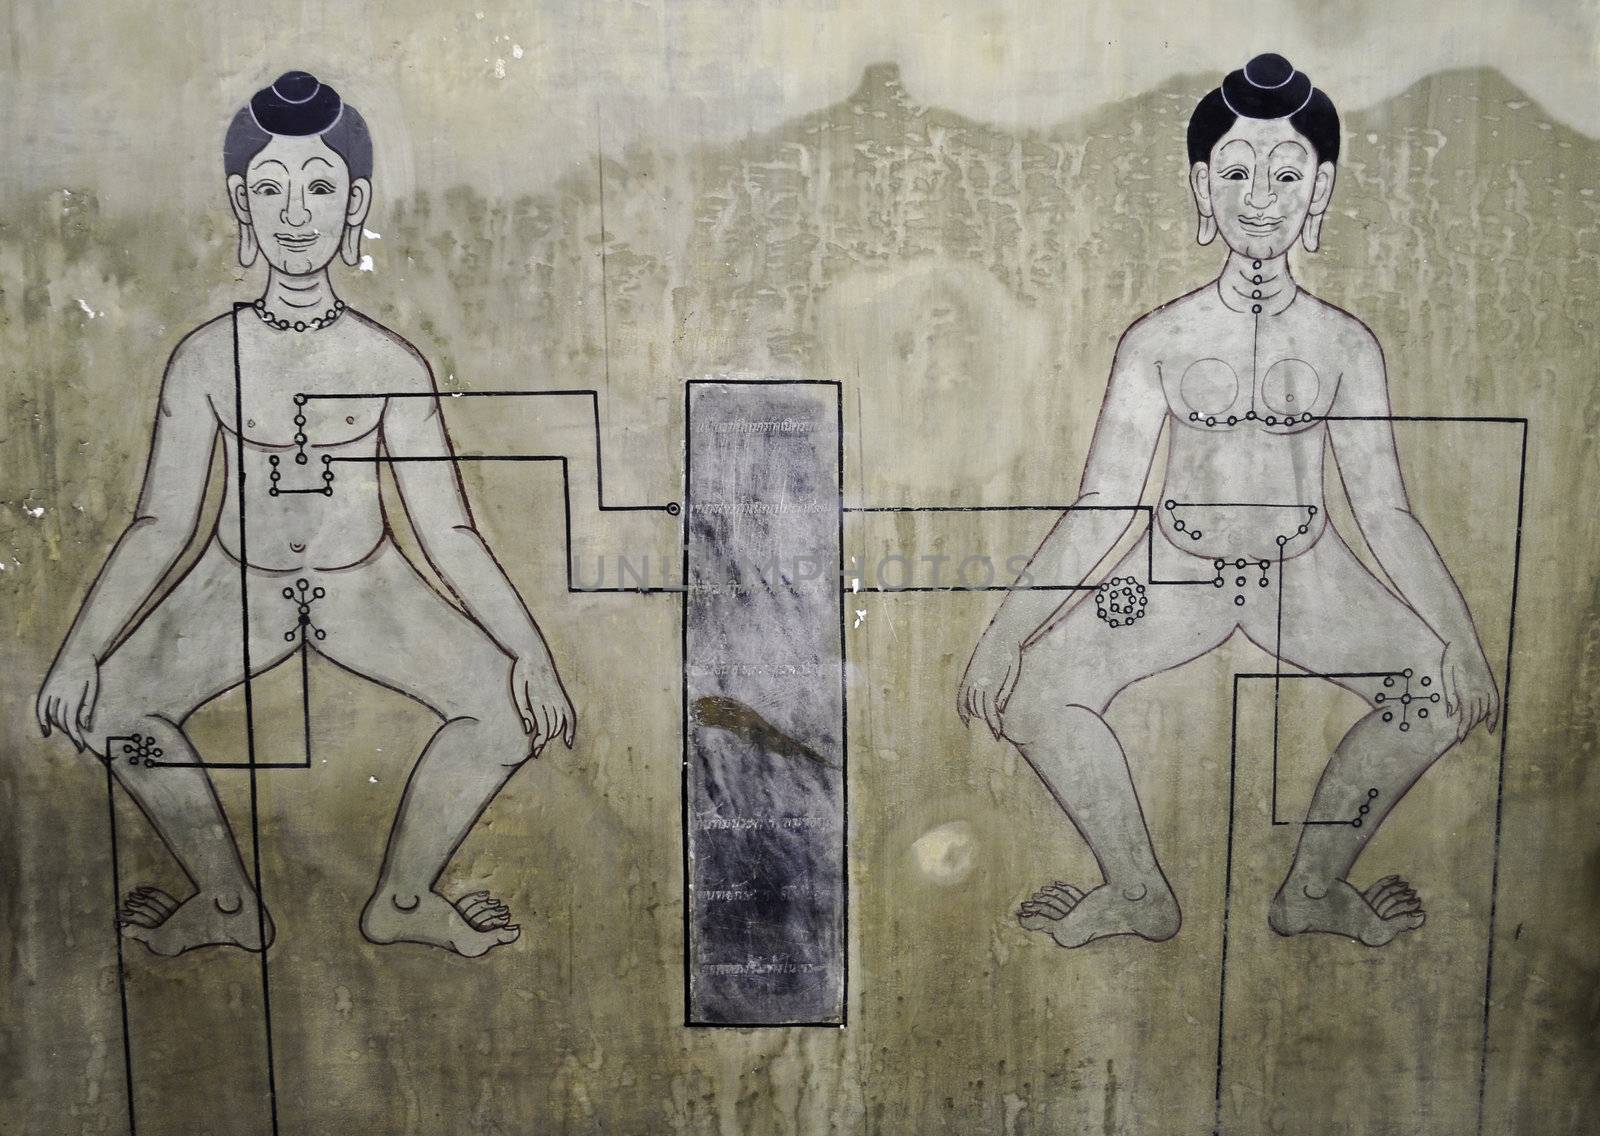 A painting in an old Thai Buddhist temple showing male and female anatomy